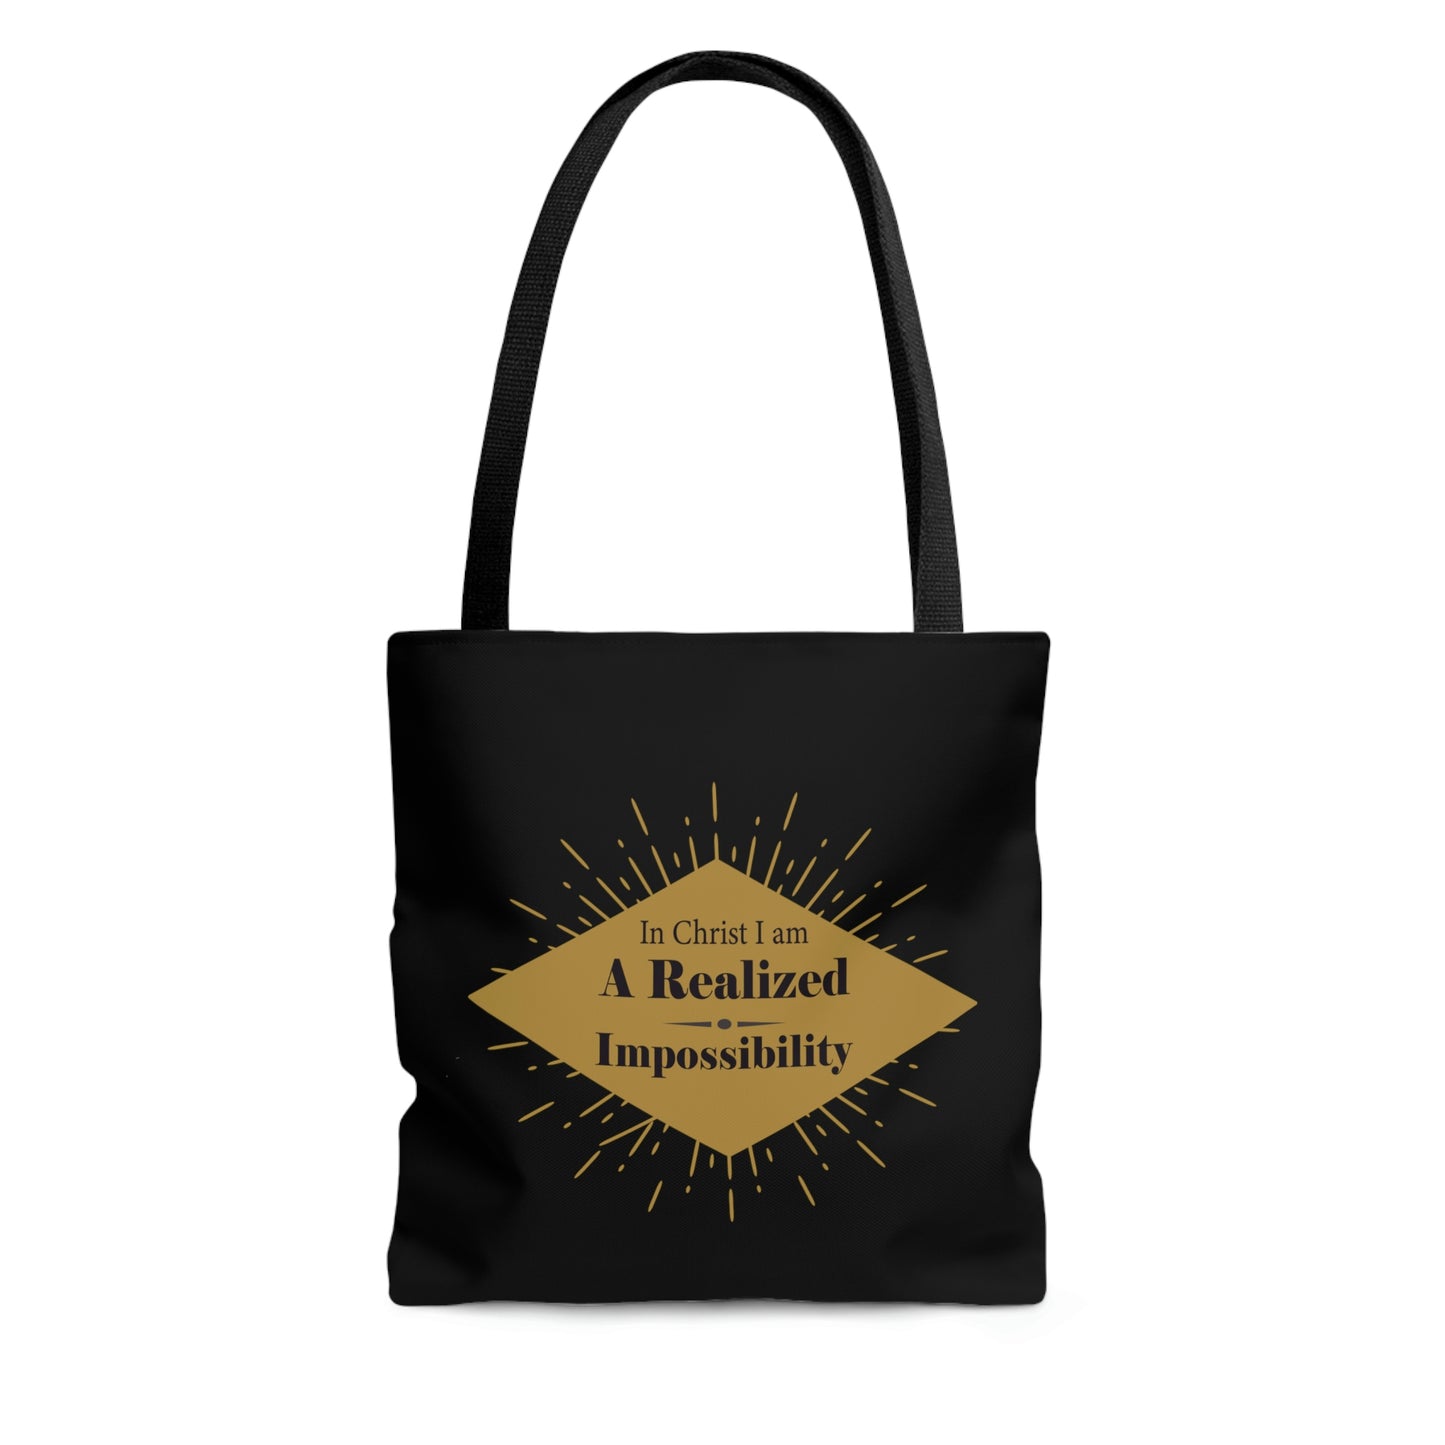 In Christ I Am A Realized Impossibility Tote Bag